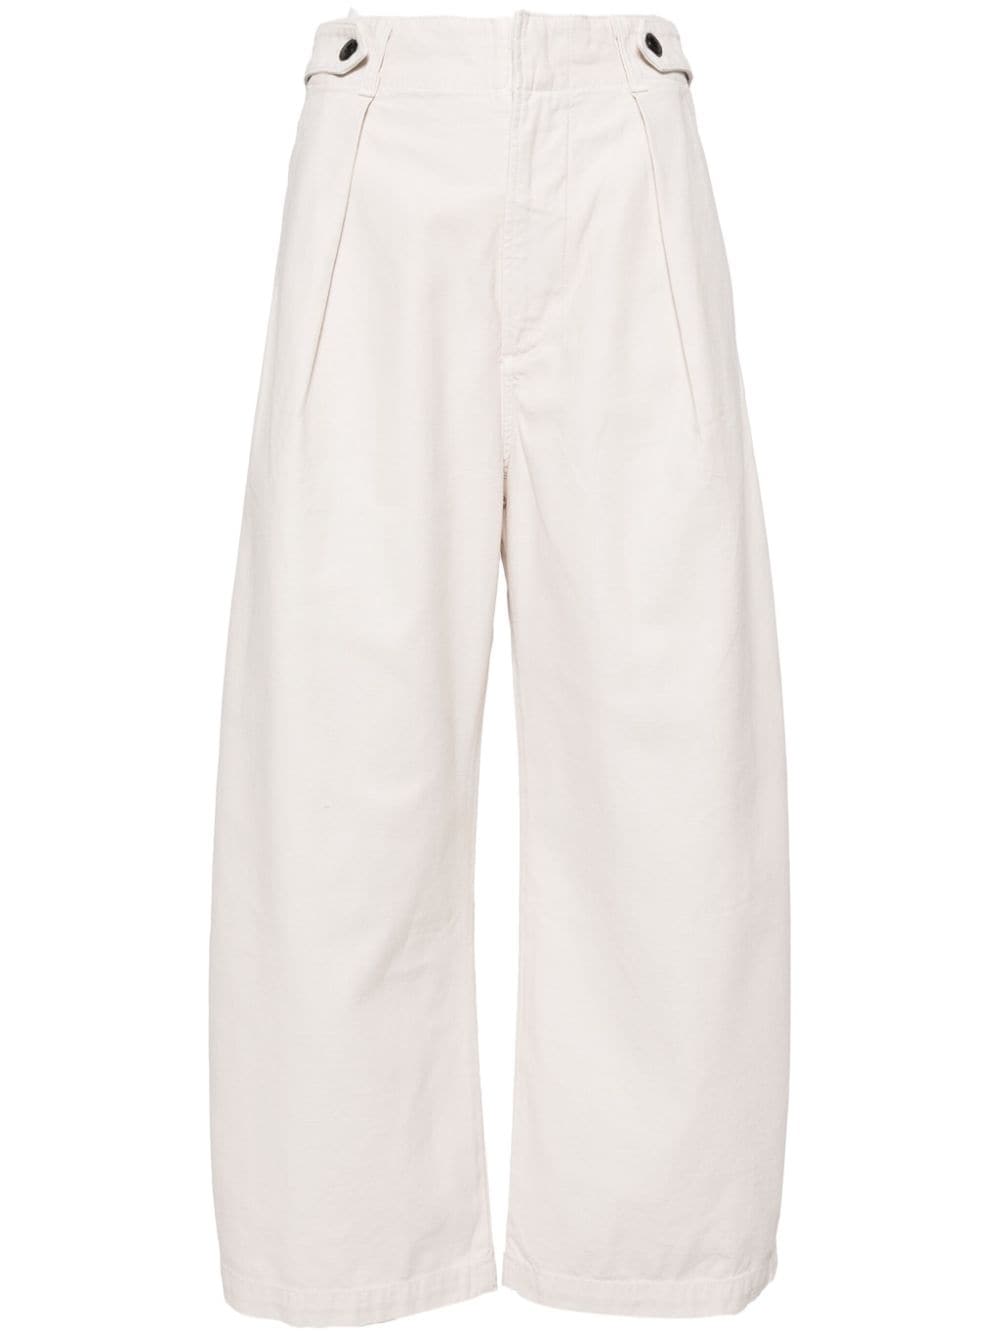 CITIZENS OF HUMANITY PAYTON WIDE-LEG TROUSERS